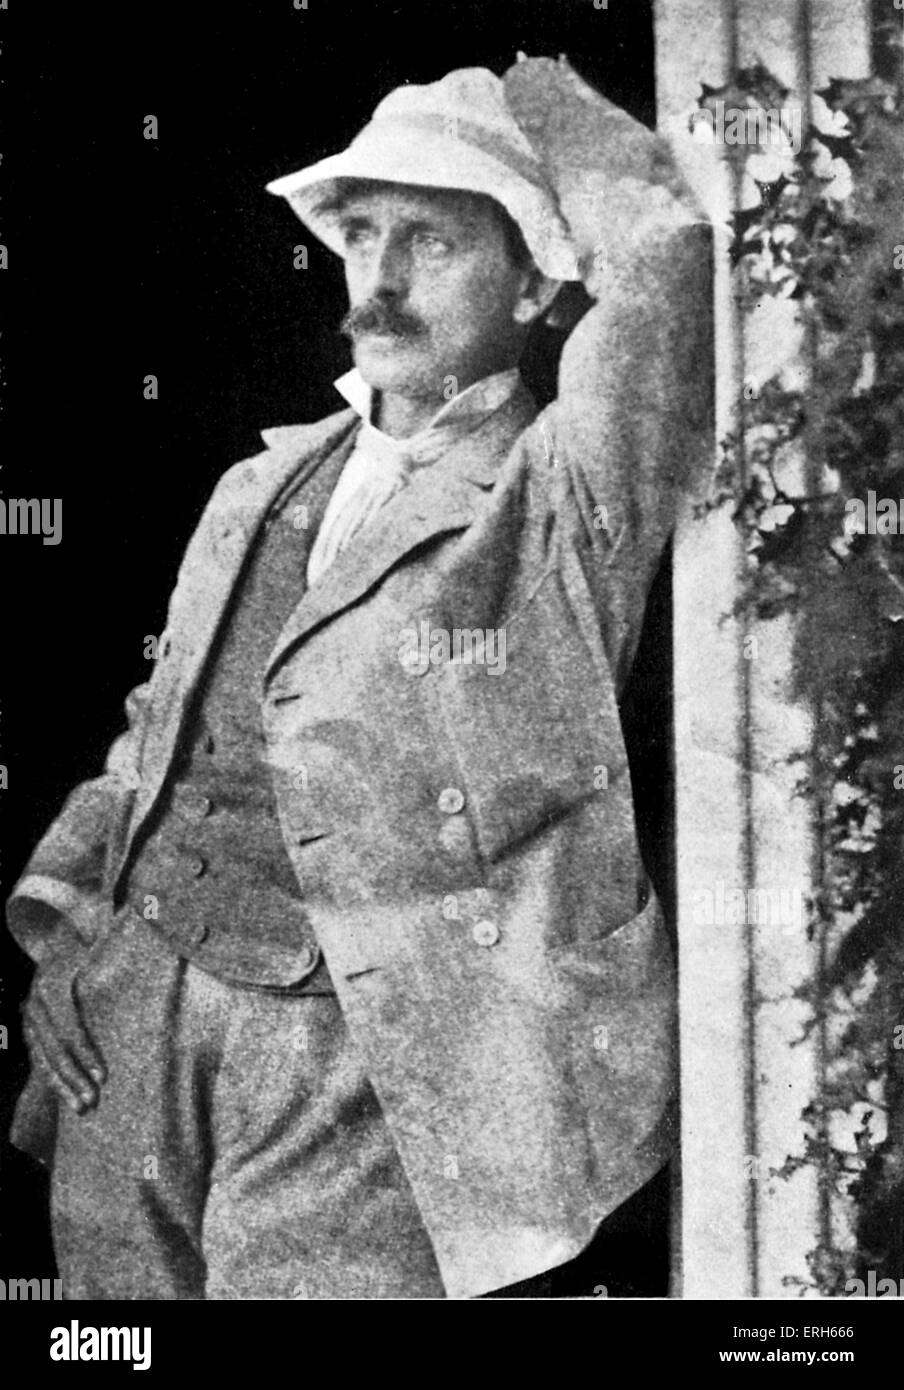 Sir J.M. Barrie. Scottish playwright and novelist. James Matthew Barrie: 9 May 1860 - 19 June 1937 Stock Photo